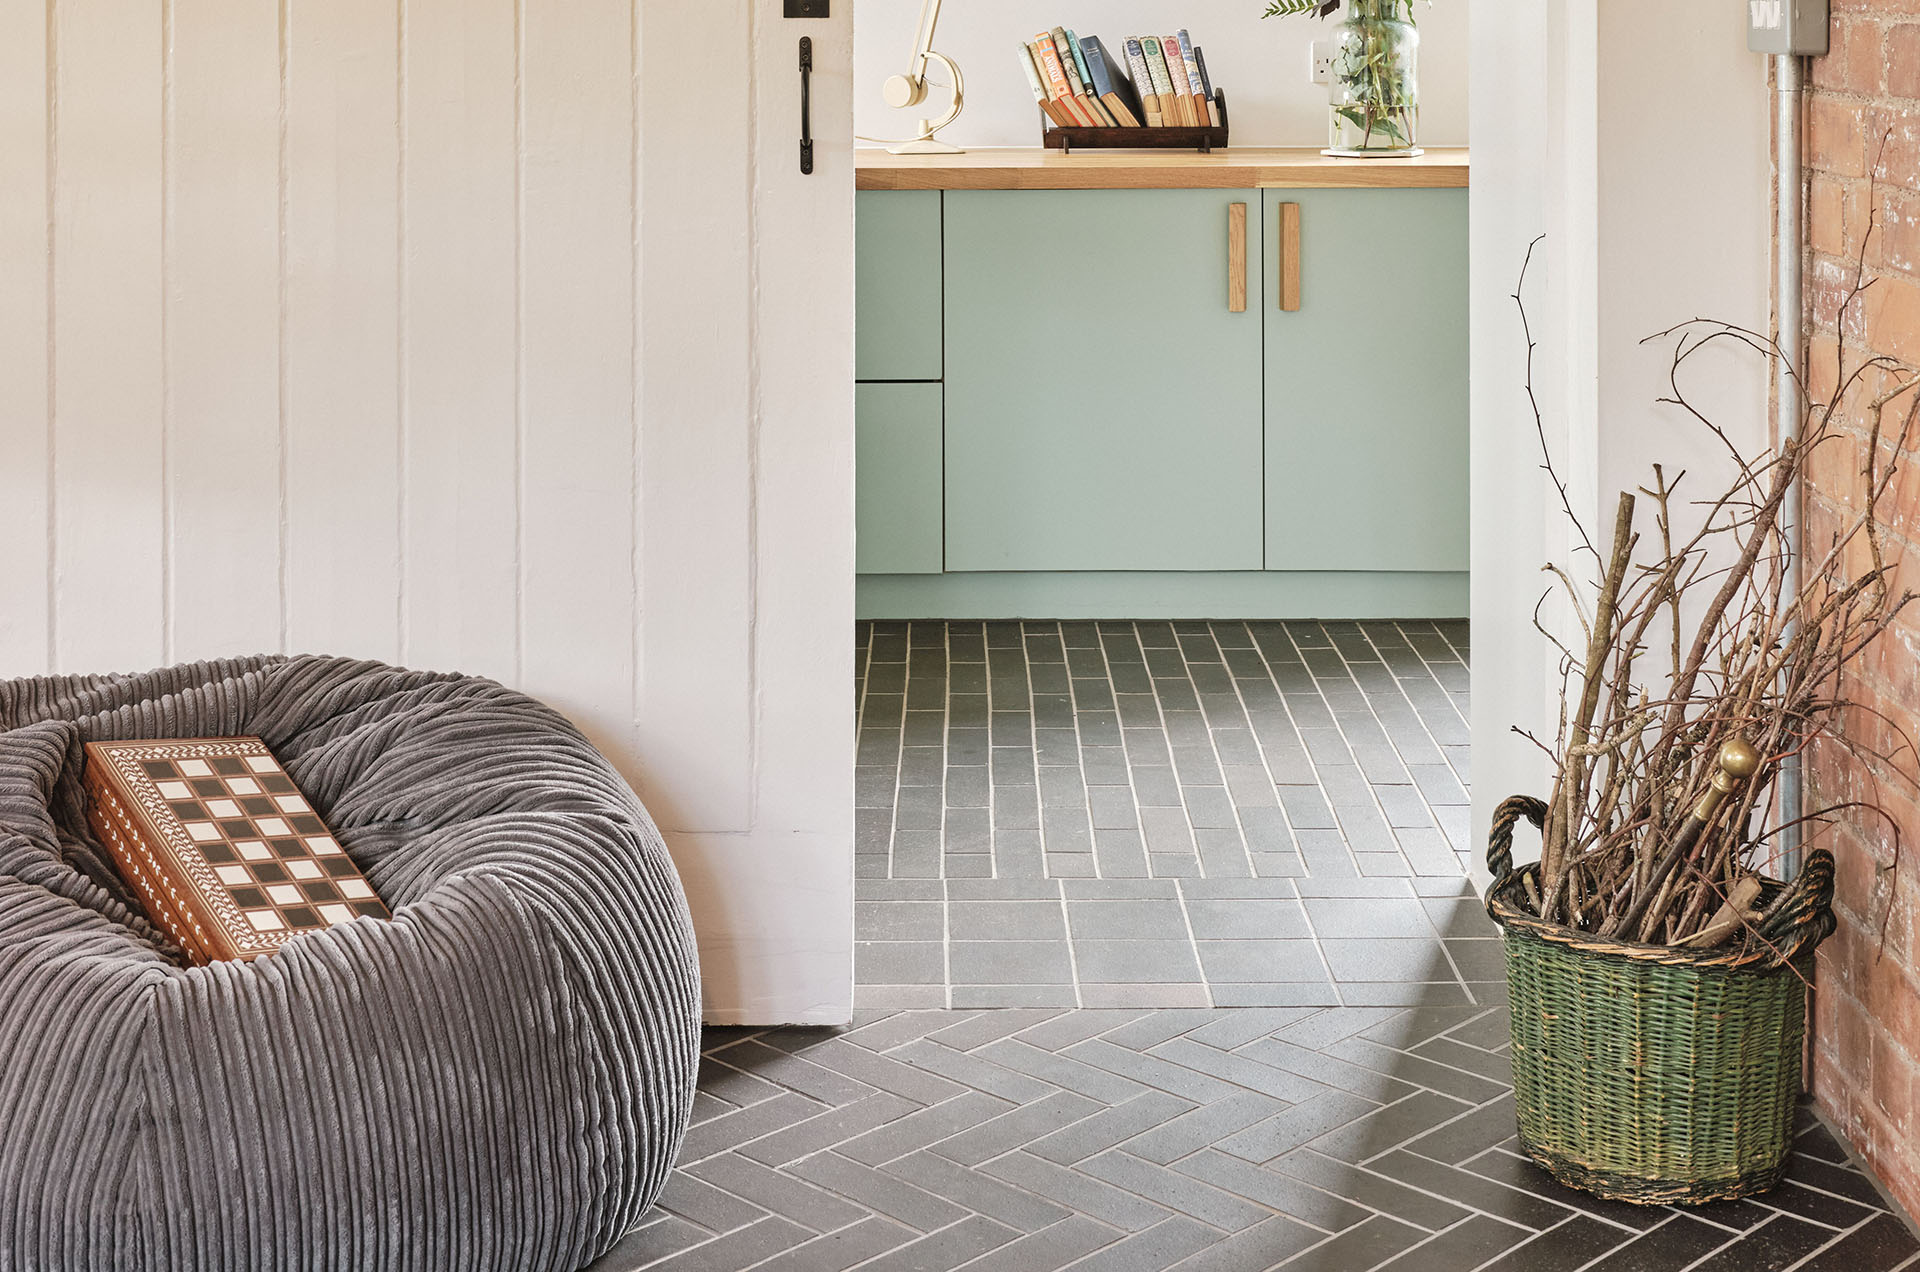 Staffs blue quarry tiles are laid in a variety of patterns at the RIBA winning Plas Hendry Stable conversion by Studio Brassica